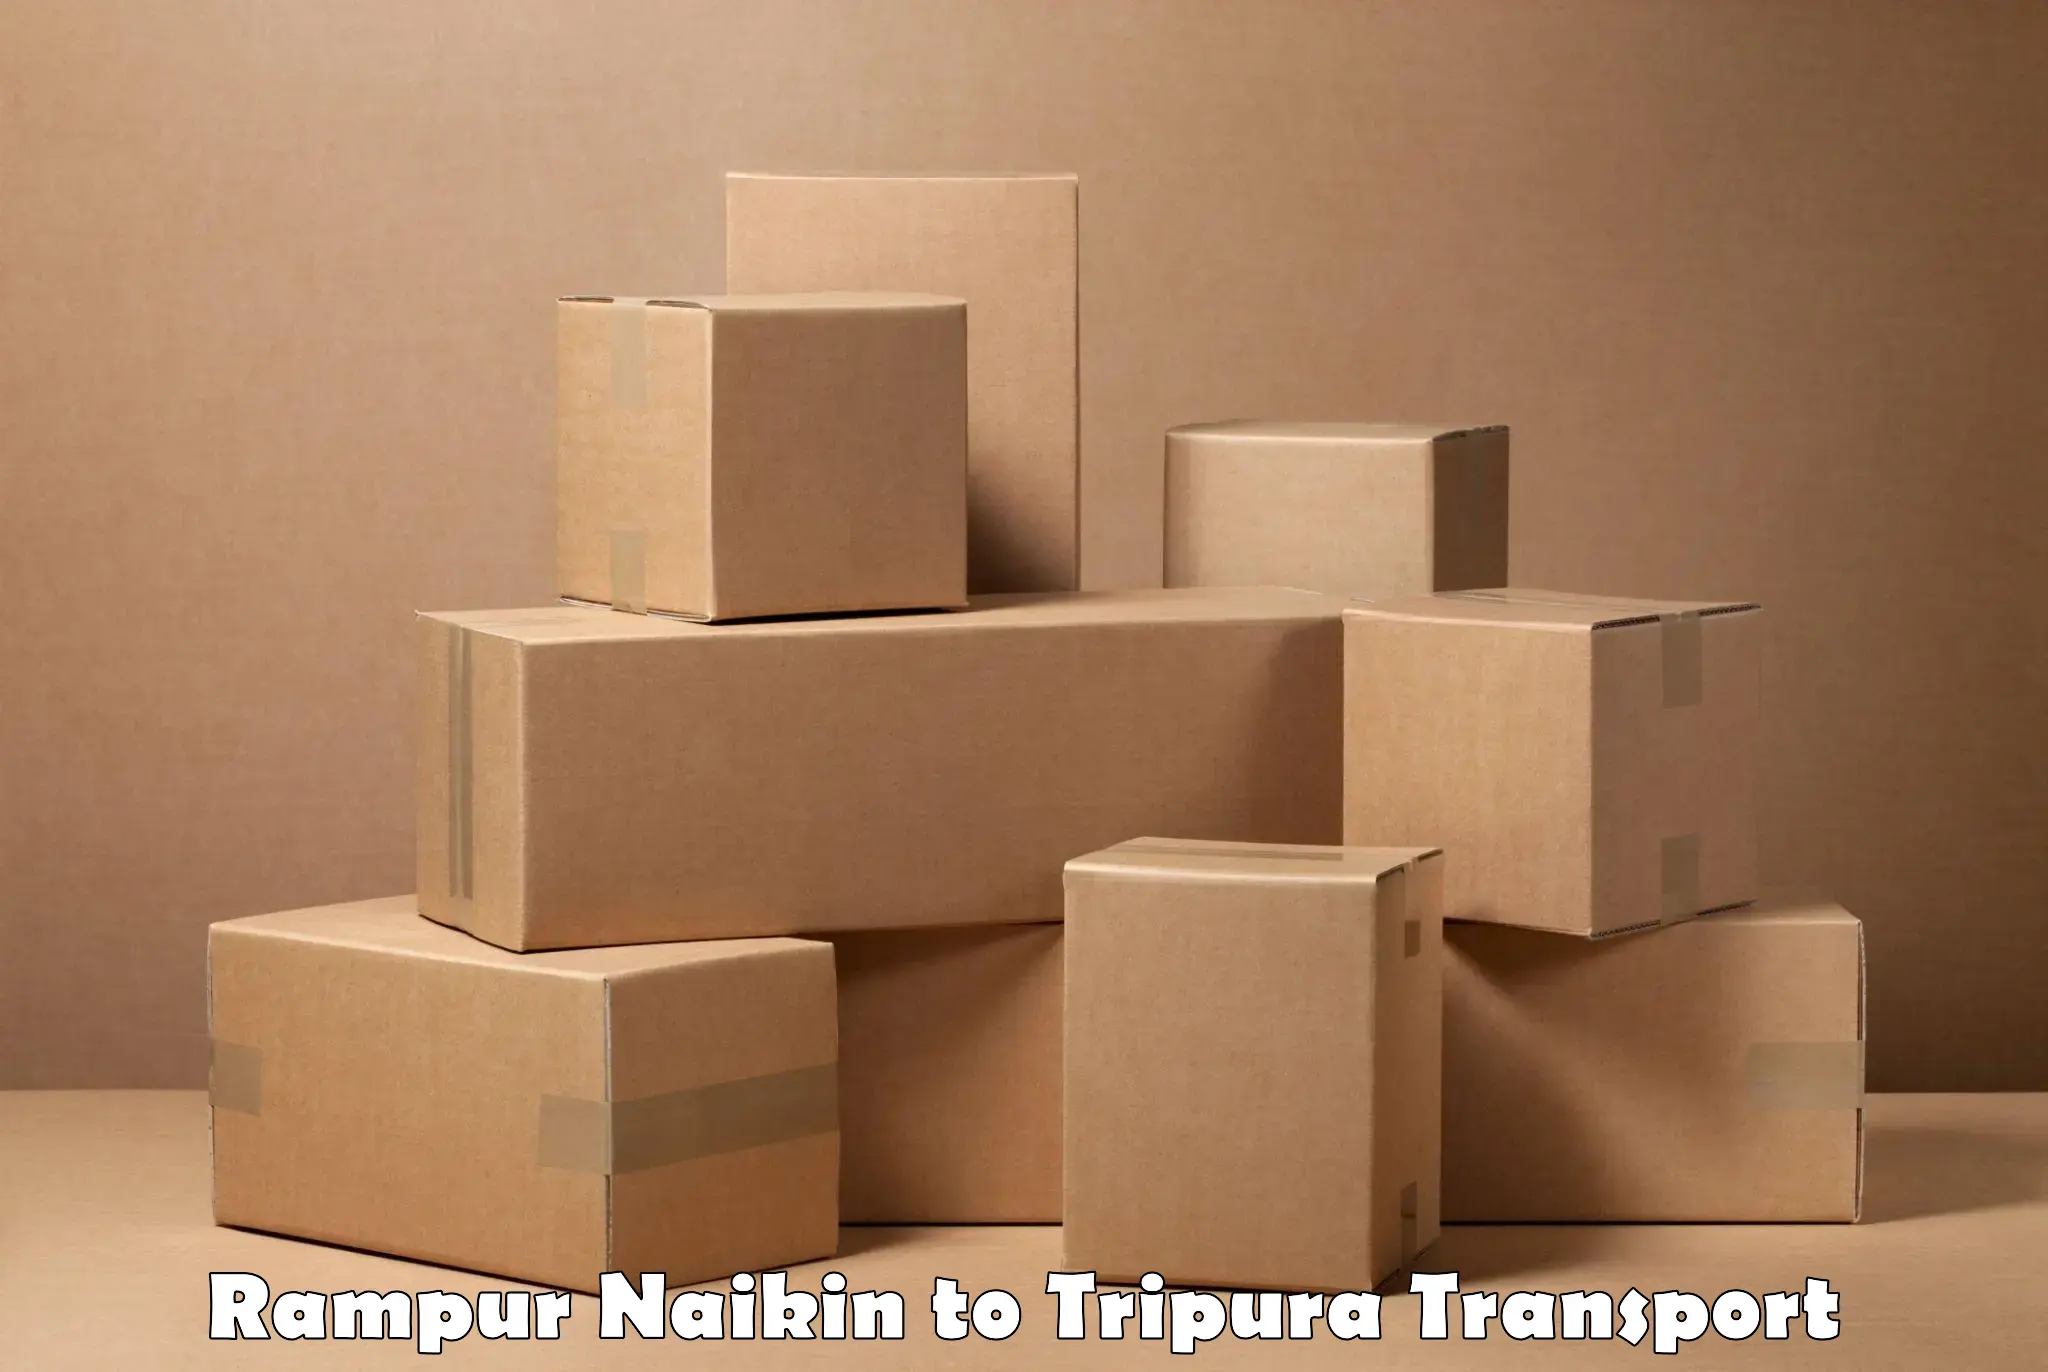 Package delivery services Rampur Naikin to Bishalgarh